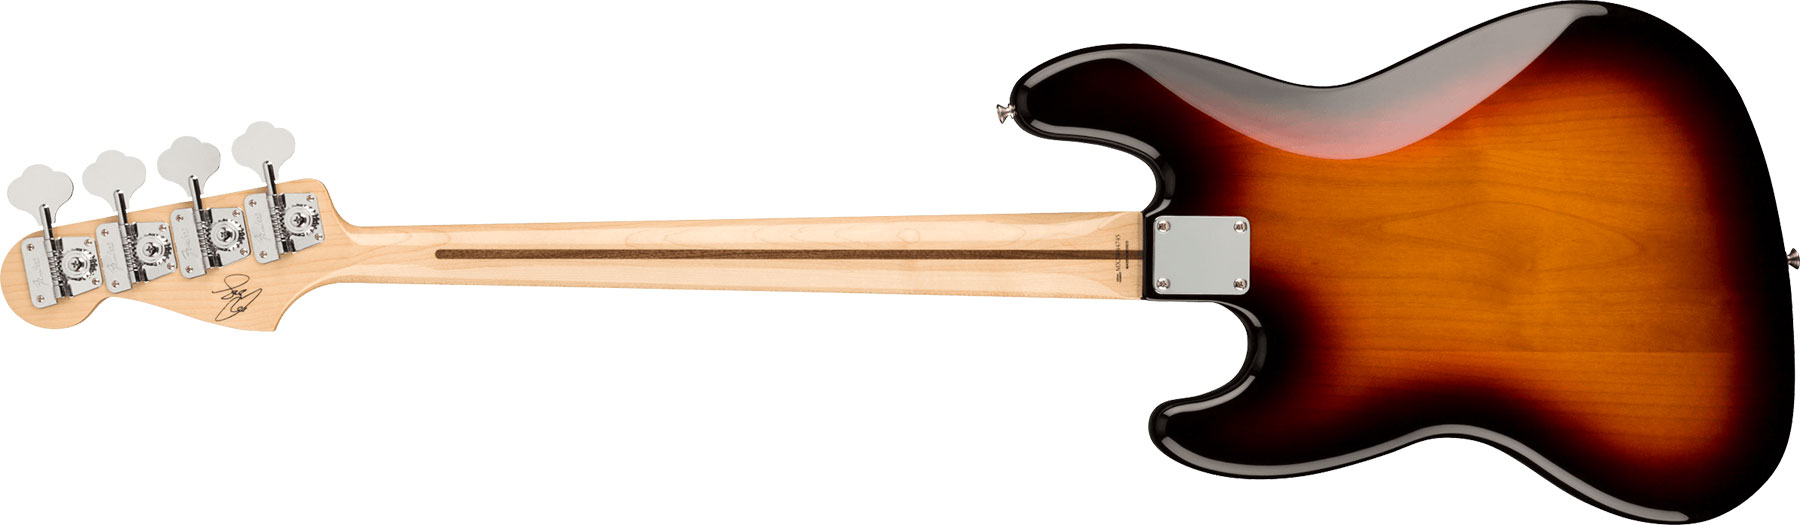 Fender Geddy Lee Jazz Bass Signature Mex Mn - 3-color Sunburst - Solid body electric bass - Variation 1